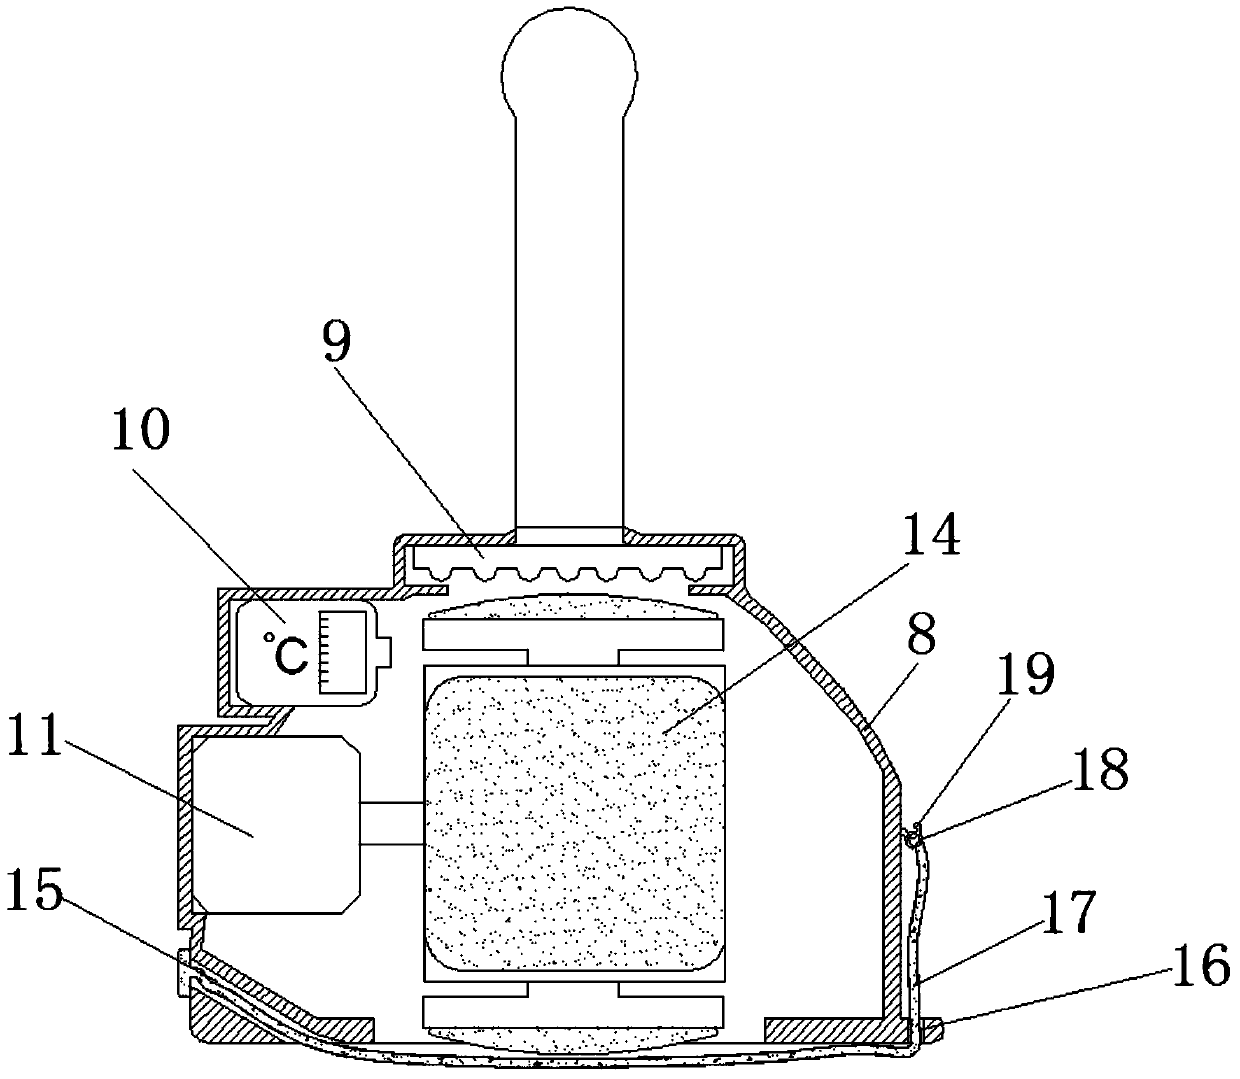 An auxiliary treatment device for abdominal distension used in gastroenterology